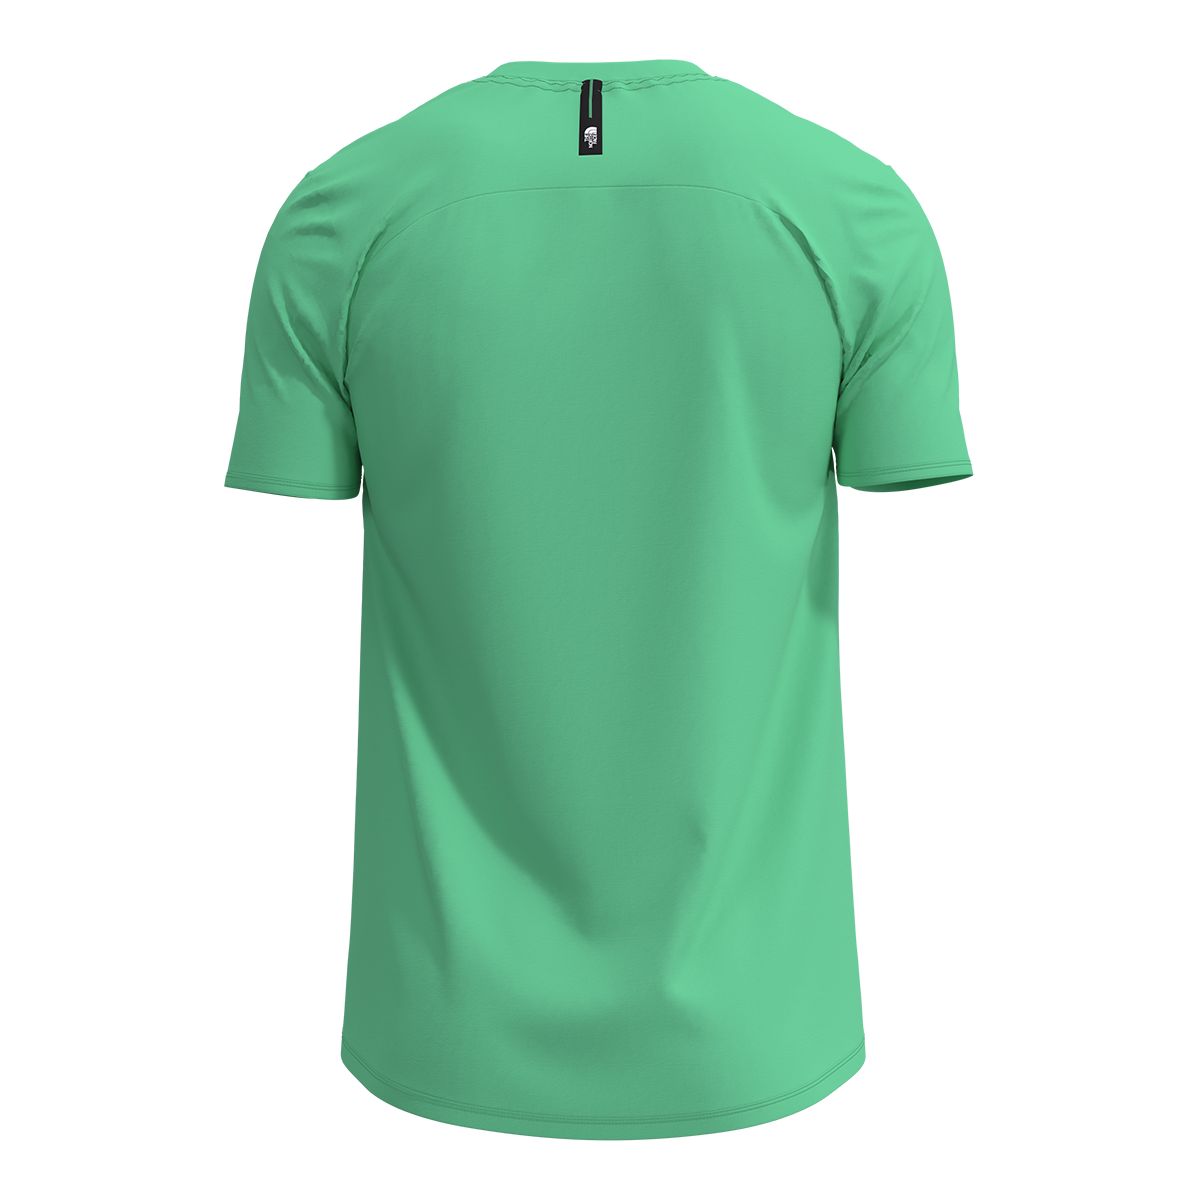 https://media-www.atmosphere.ca/product/div-03-softgoods/dpt-72-casual-clothing/sdpt-01-mens/333706921/the-north-face-men-s-big-pine-eco-active-crew-t-shirt-742bc14d-b6f1-48cb-88f3-b3848c6ede0a-jpgrendition.jpg?imdensity=1&imwidth=1244&impolicy=mZoom